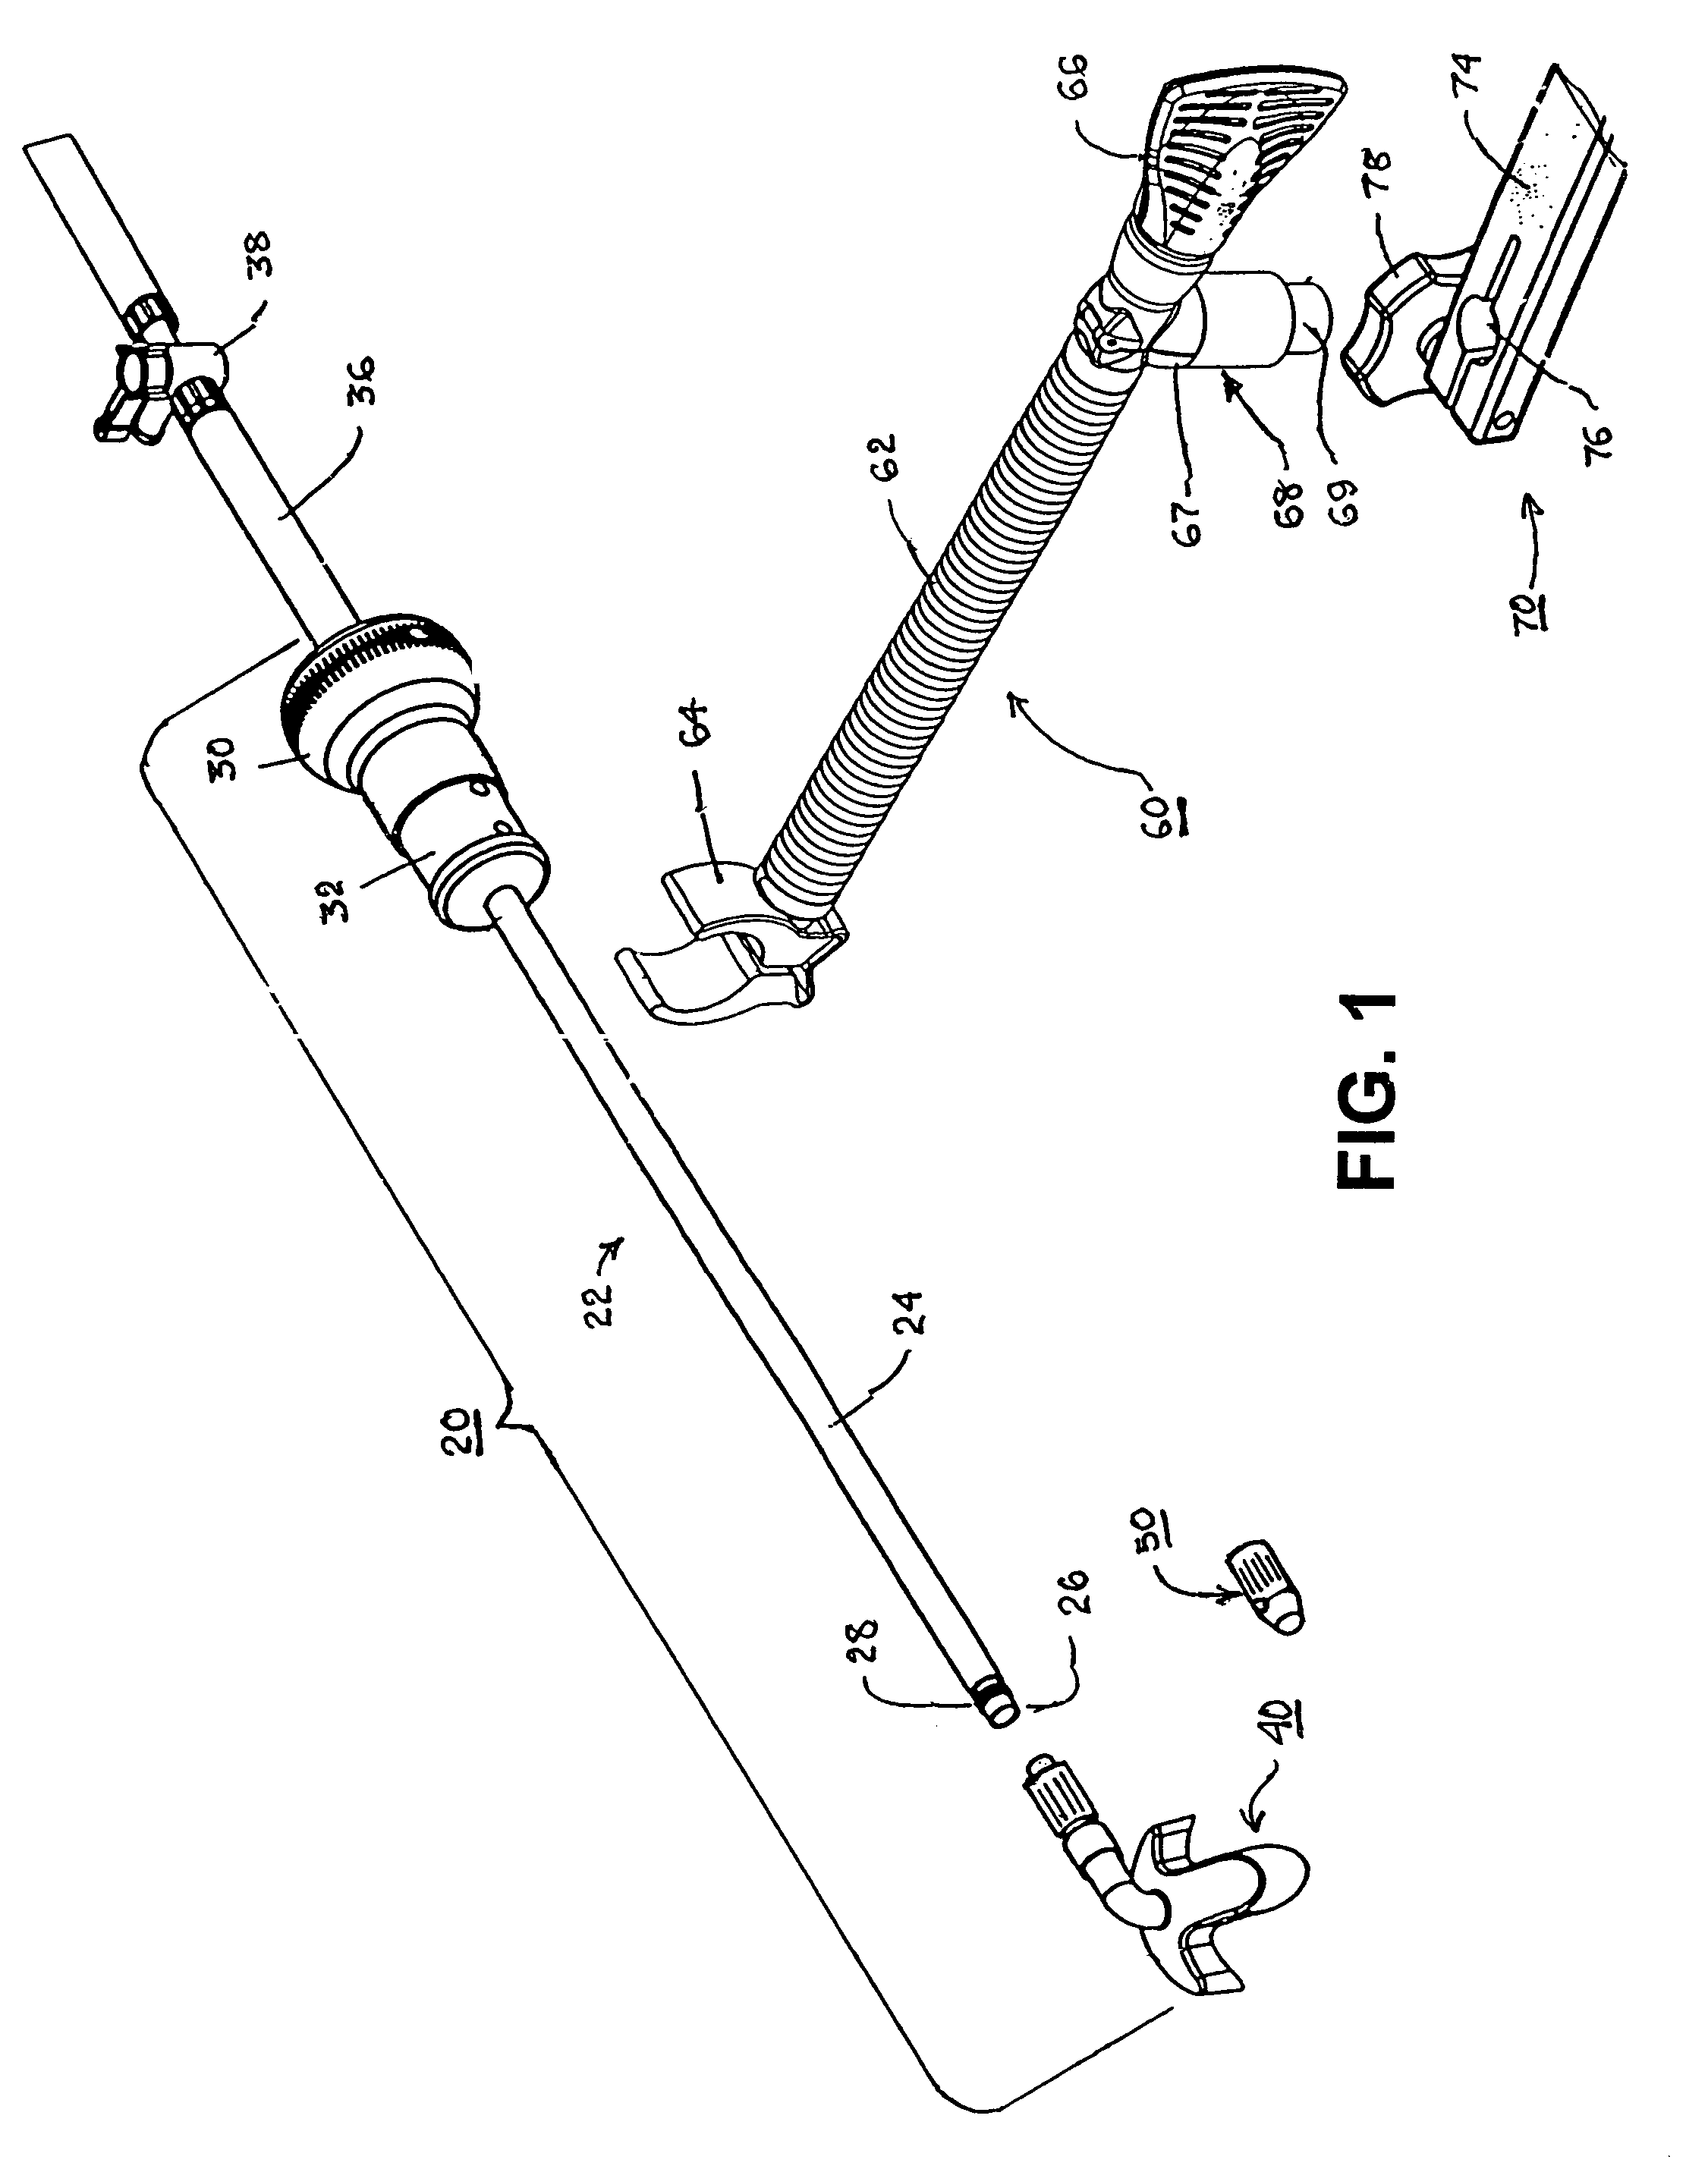 Methods and apparatus providing suction-assisted tissue engagement through a minimally invasive incision